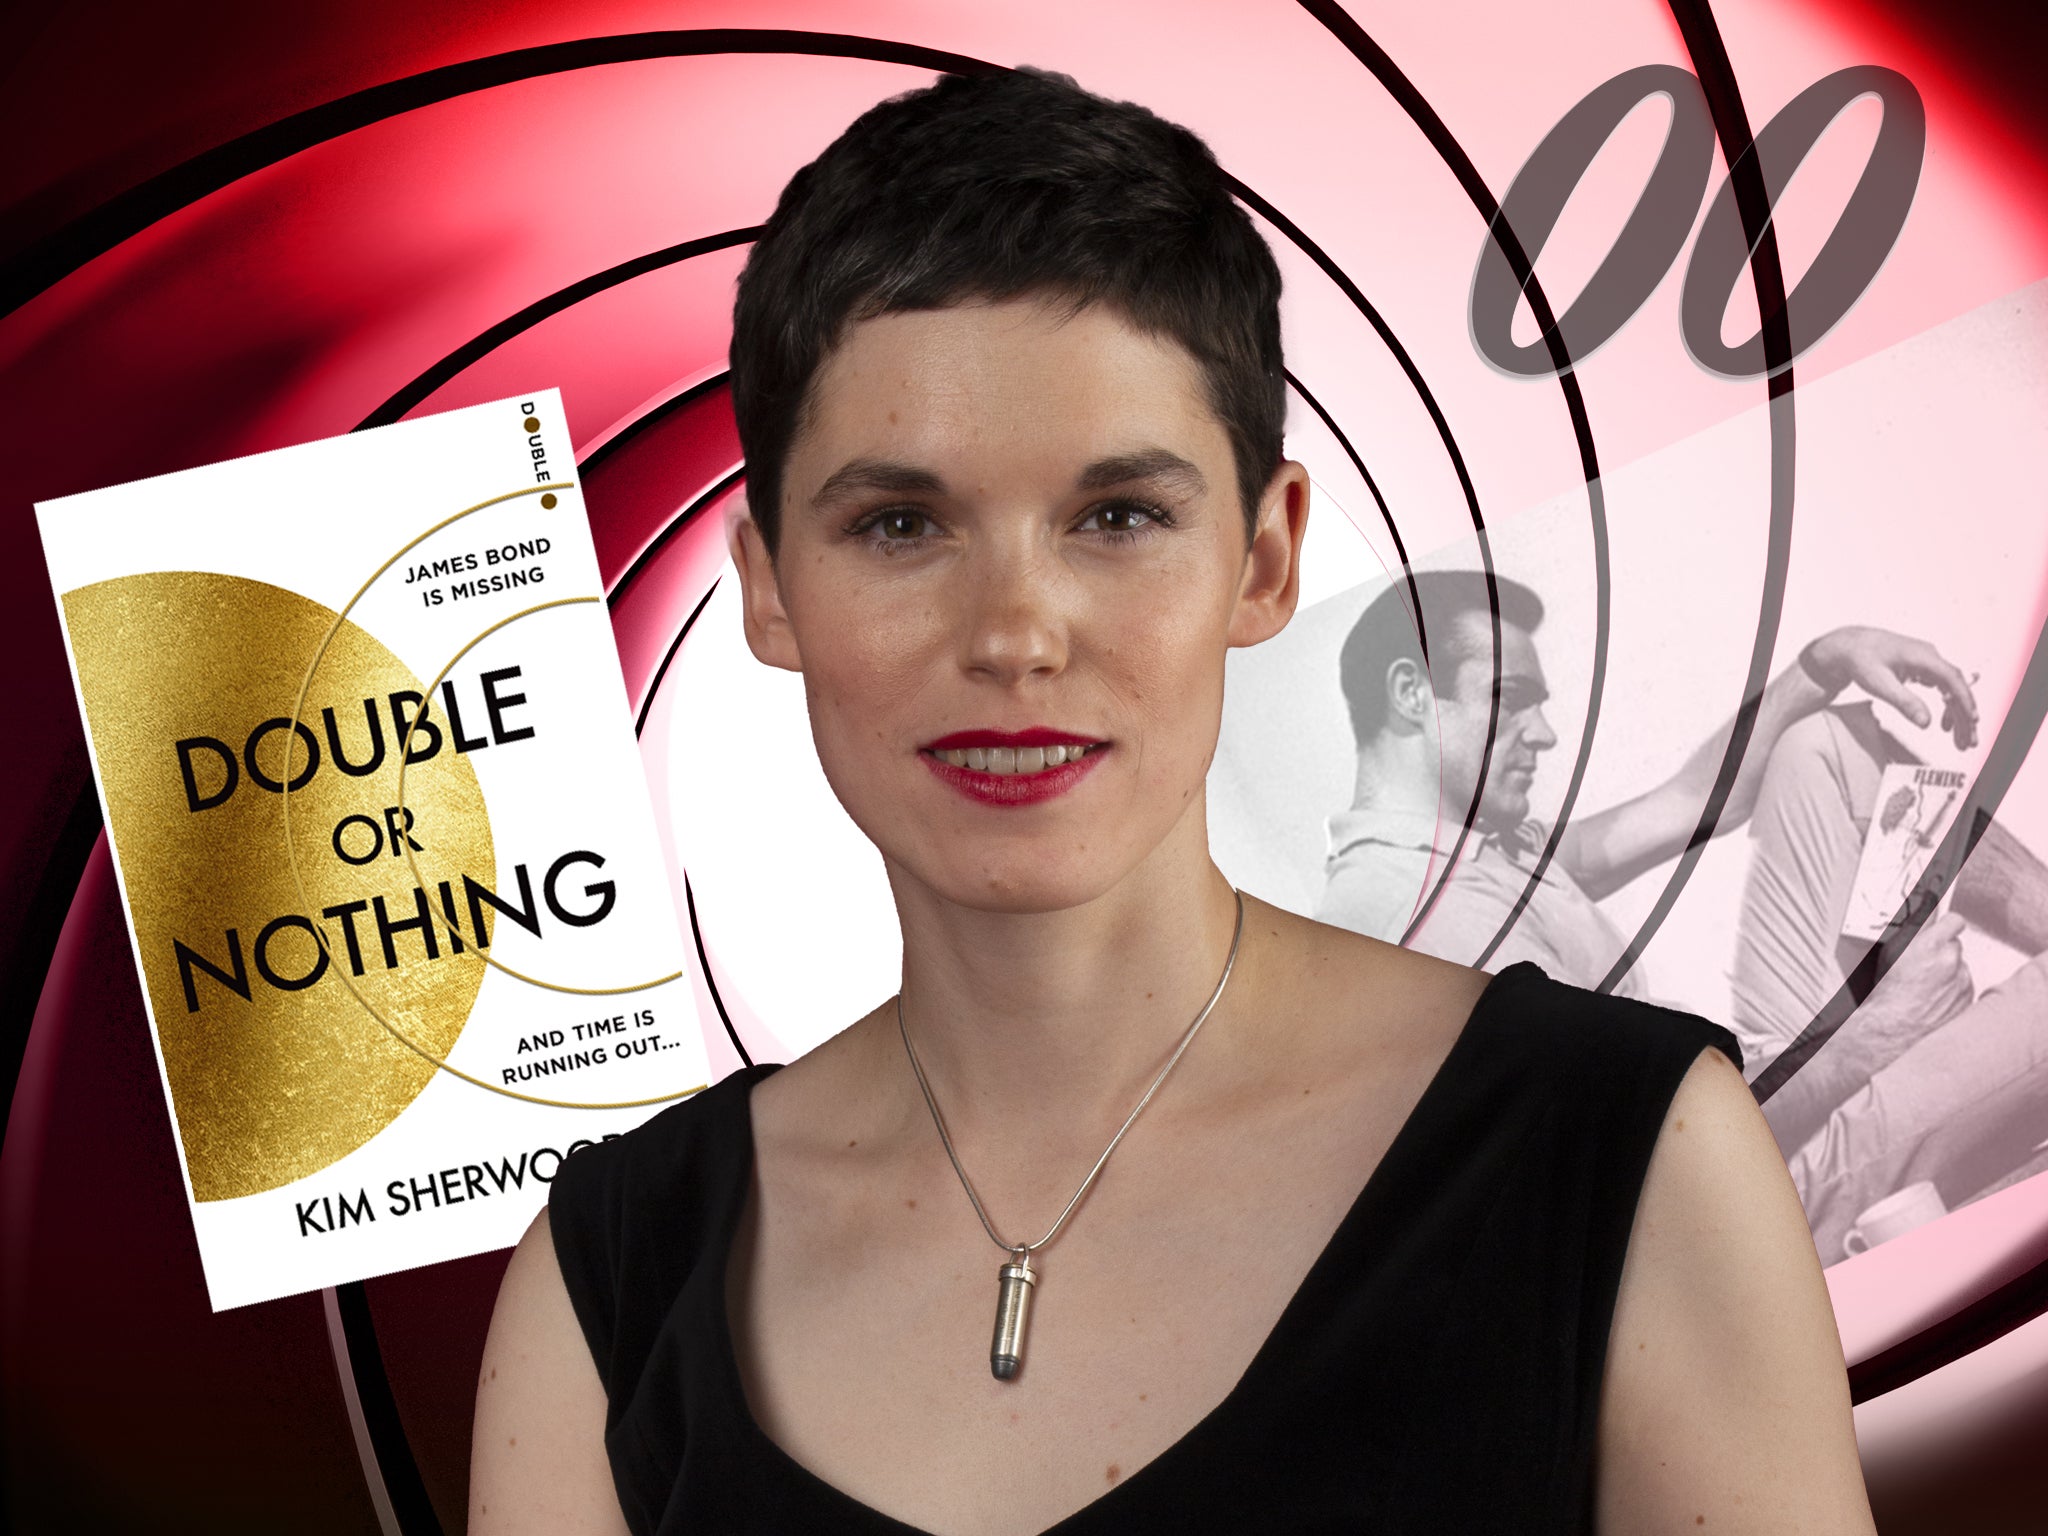 In ‘Double or Nothing’, Sherwood presents her own novel solution to the Bond question: get rid of him